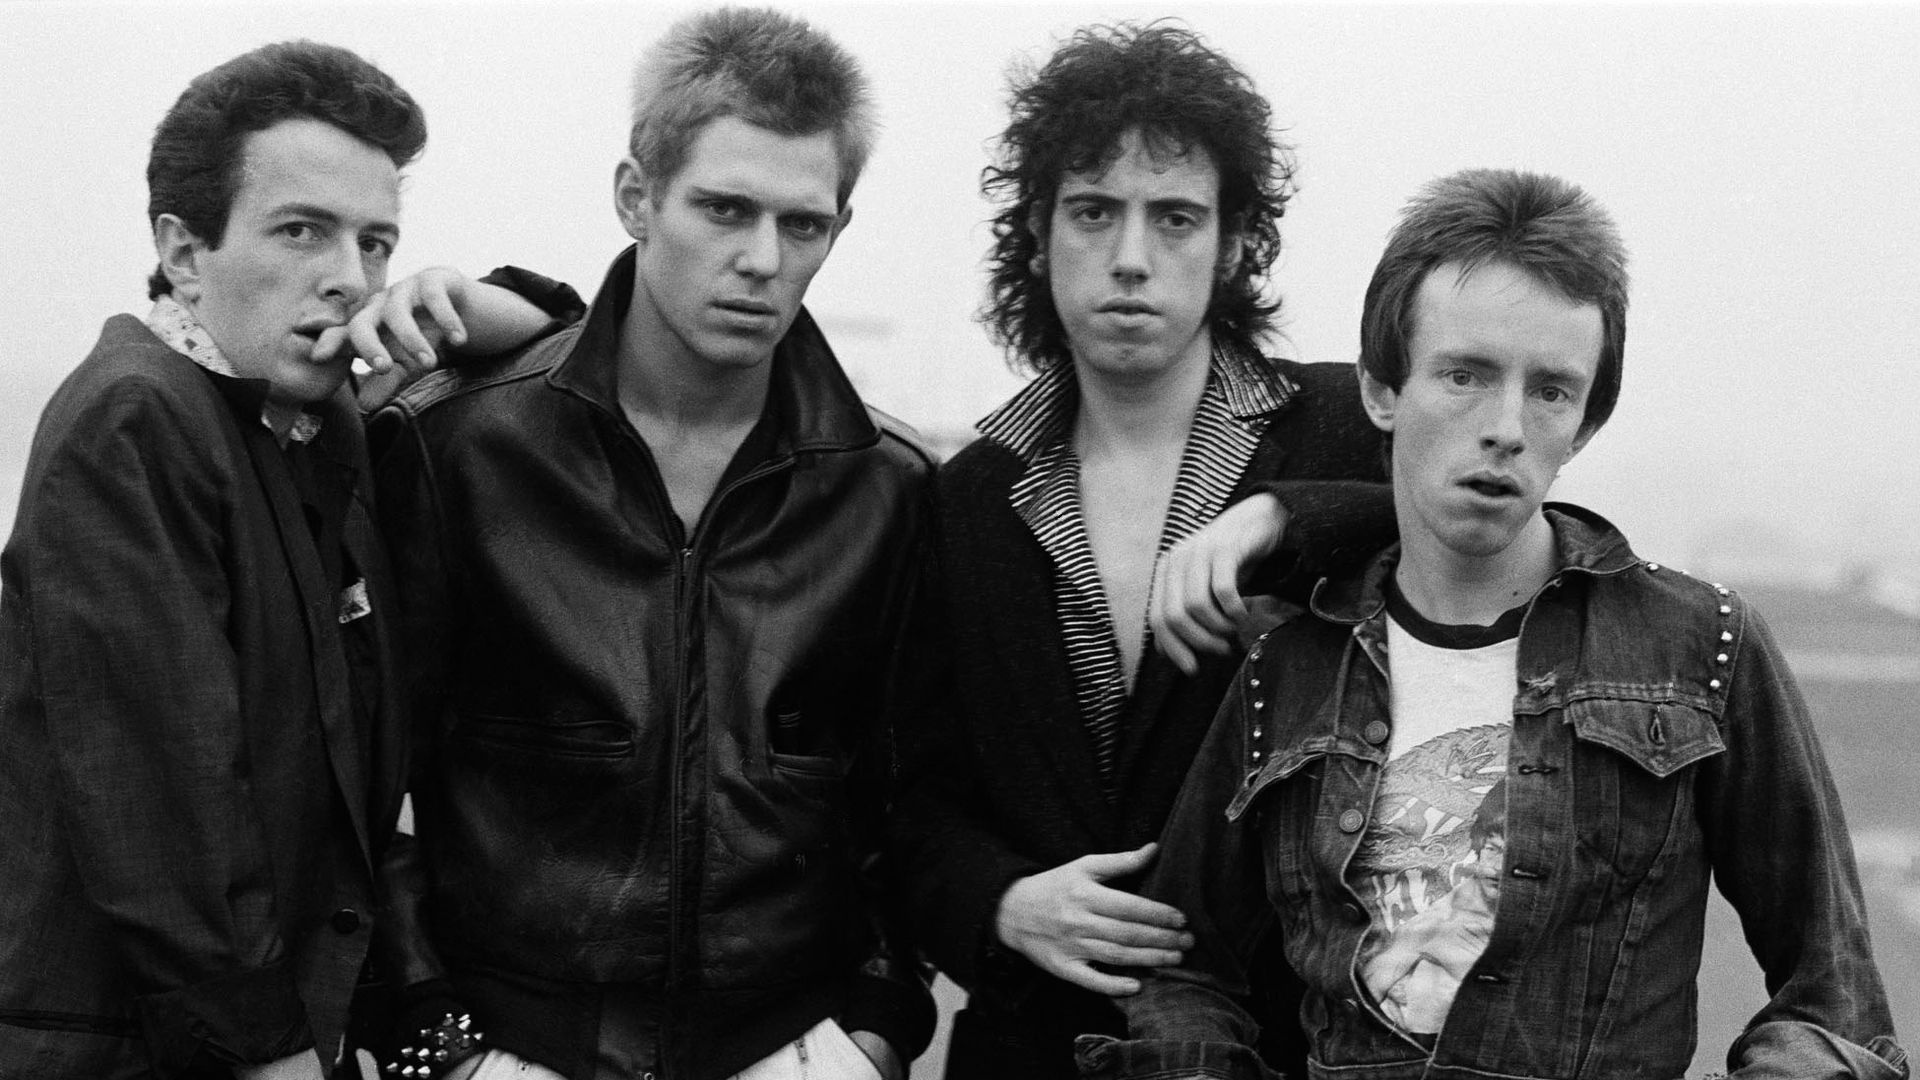 The Clash Wallpapers - Top Free The Clash Backgrounds 1920x1080